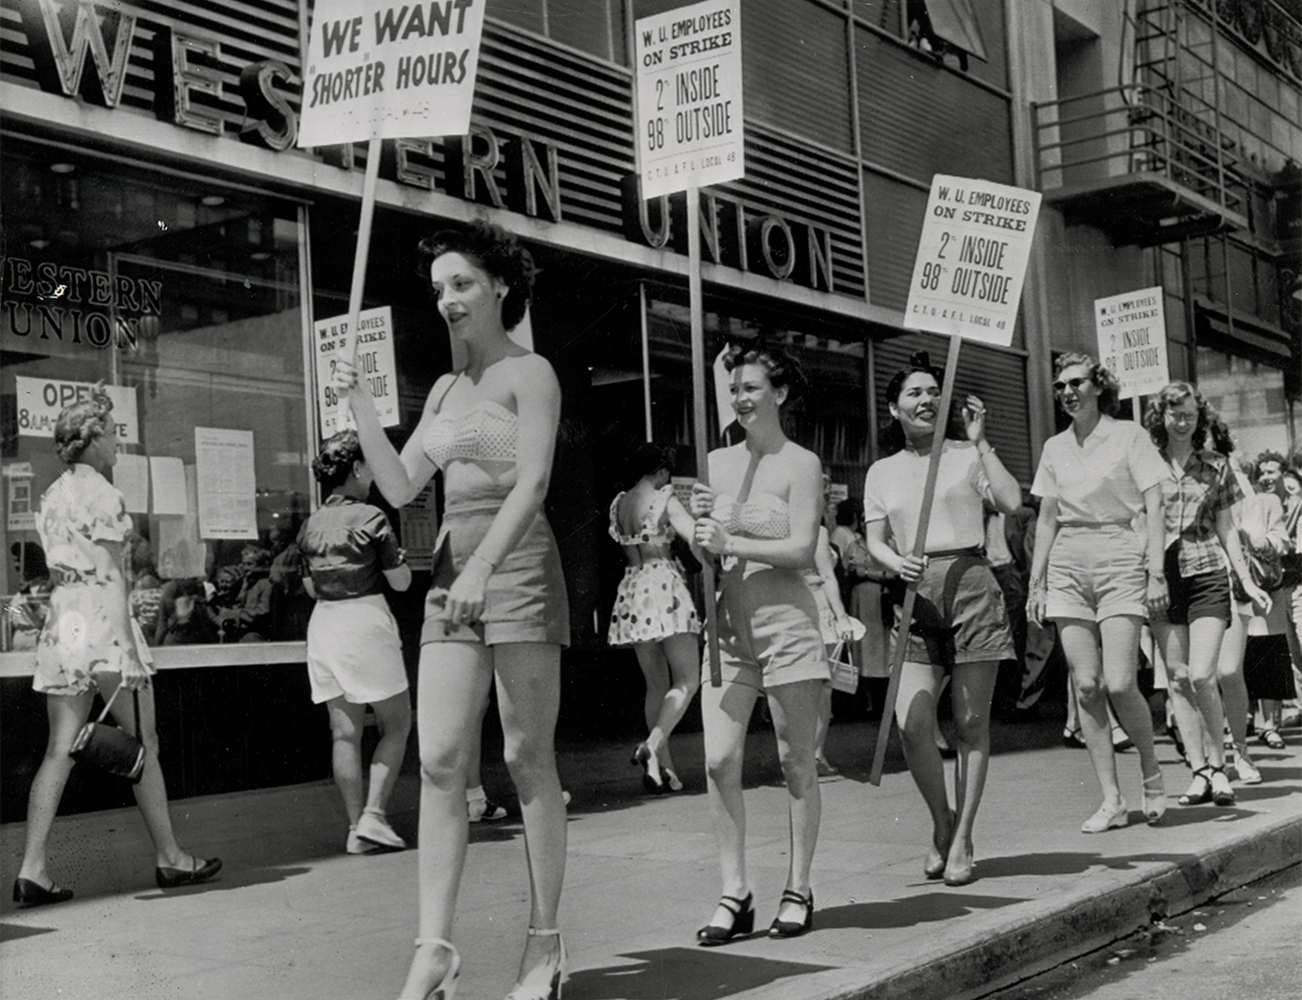 Strikers picketing in shorts to bring attention to their demand for shorter hours, United Telegraph Workers Local 48